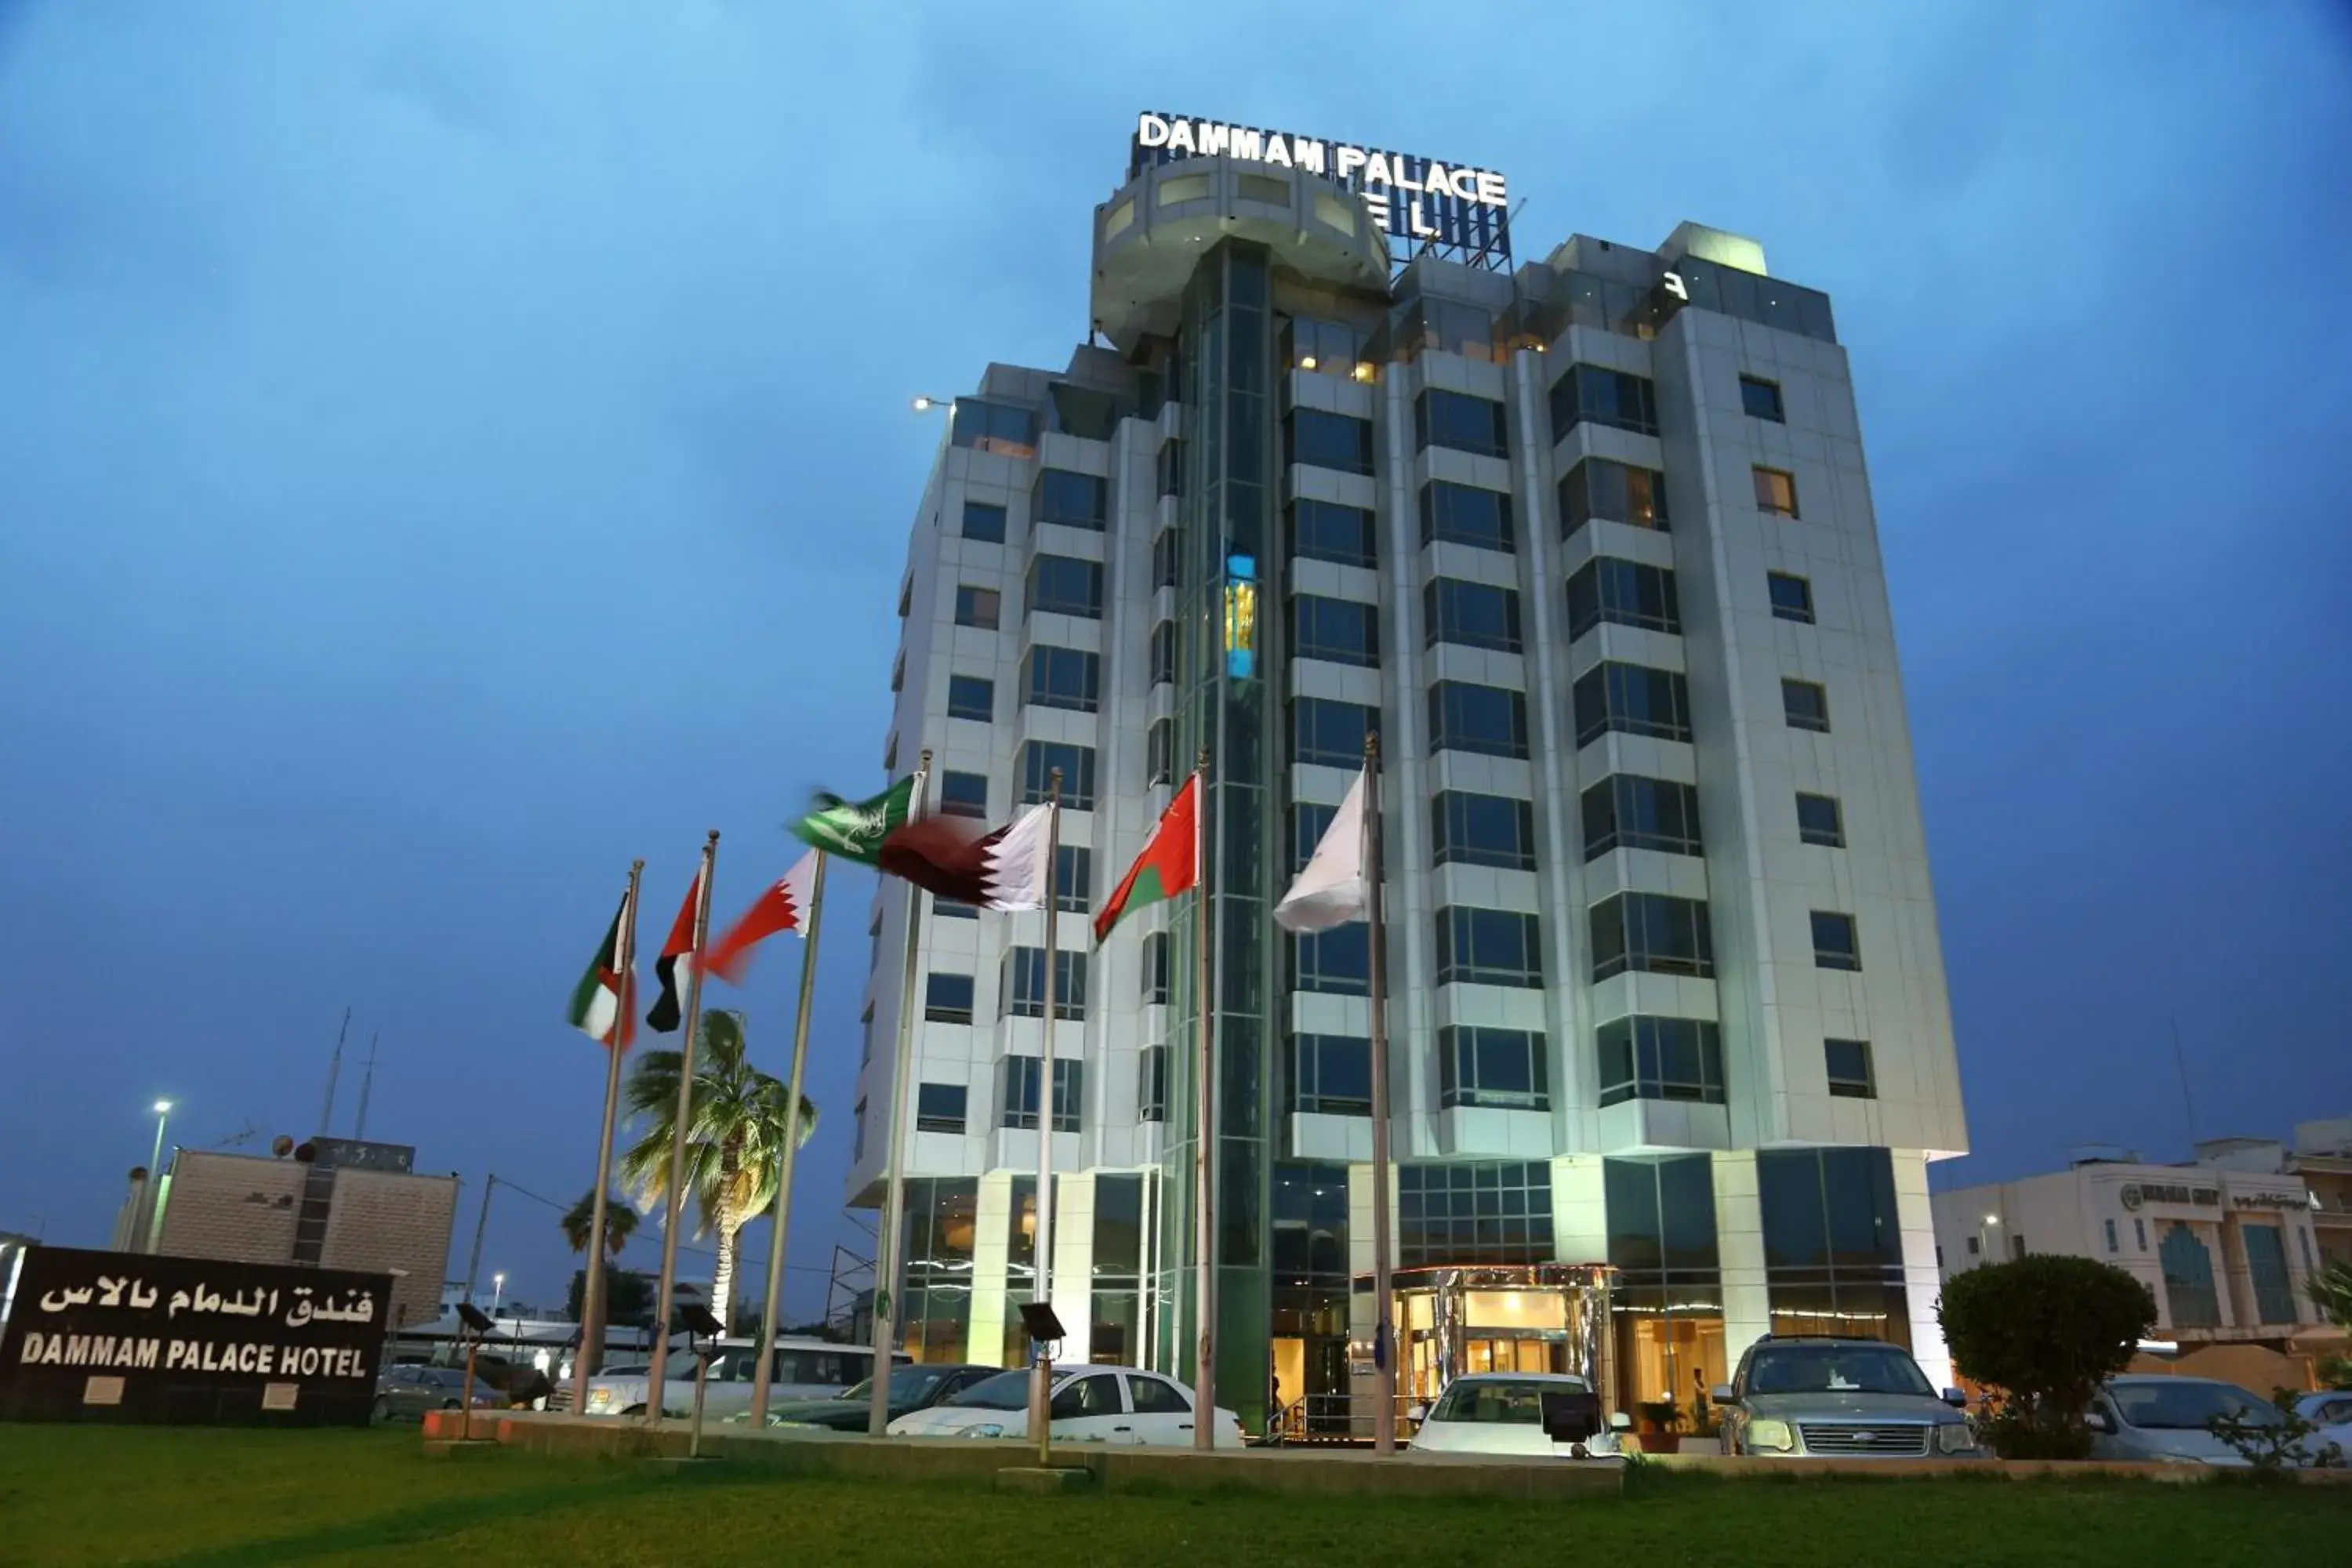 Property Building in Dammam Palace Hotel